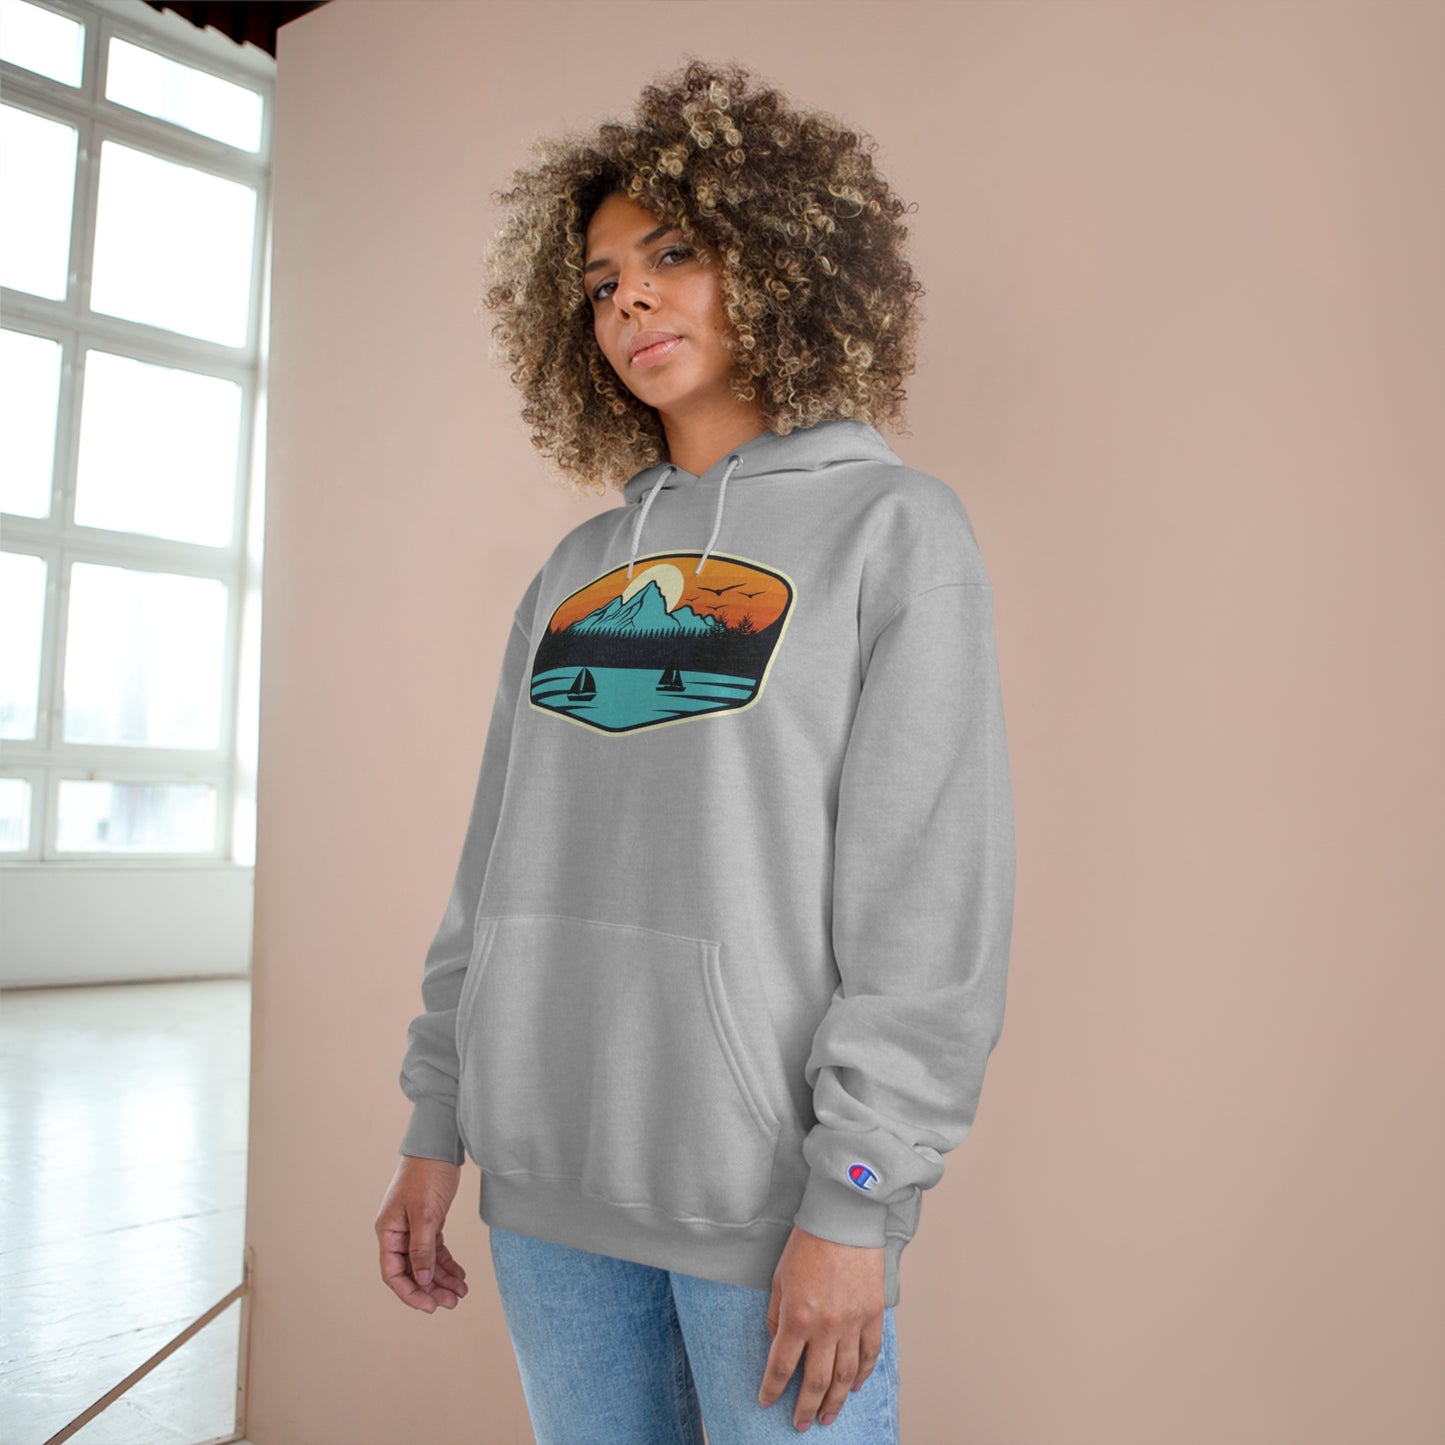 A great design that celebrates the wonderful outdoors on this very comfortable Champion Hoodie.